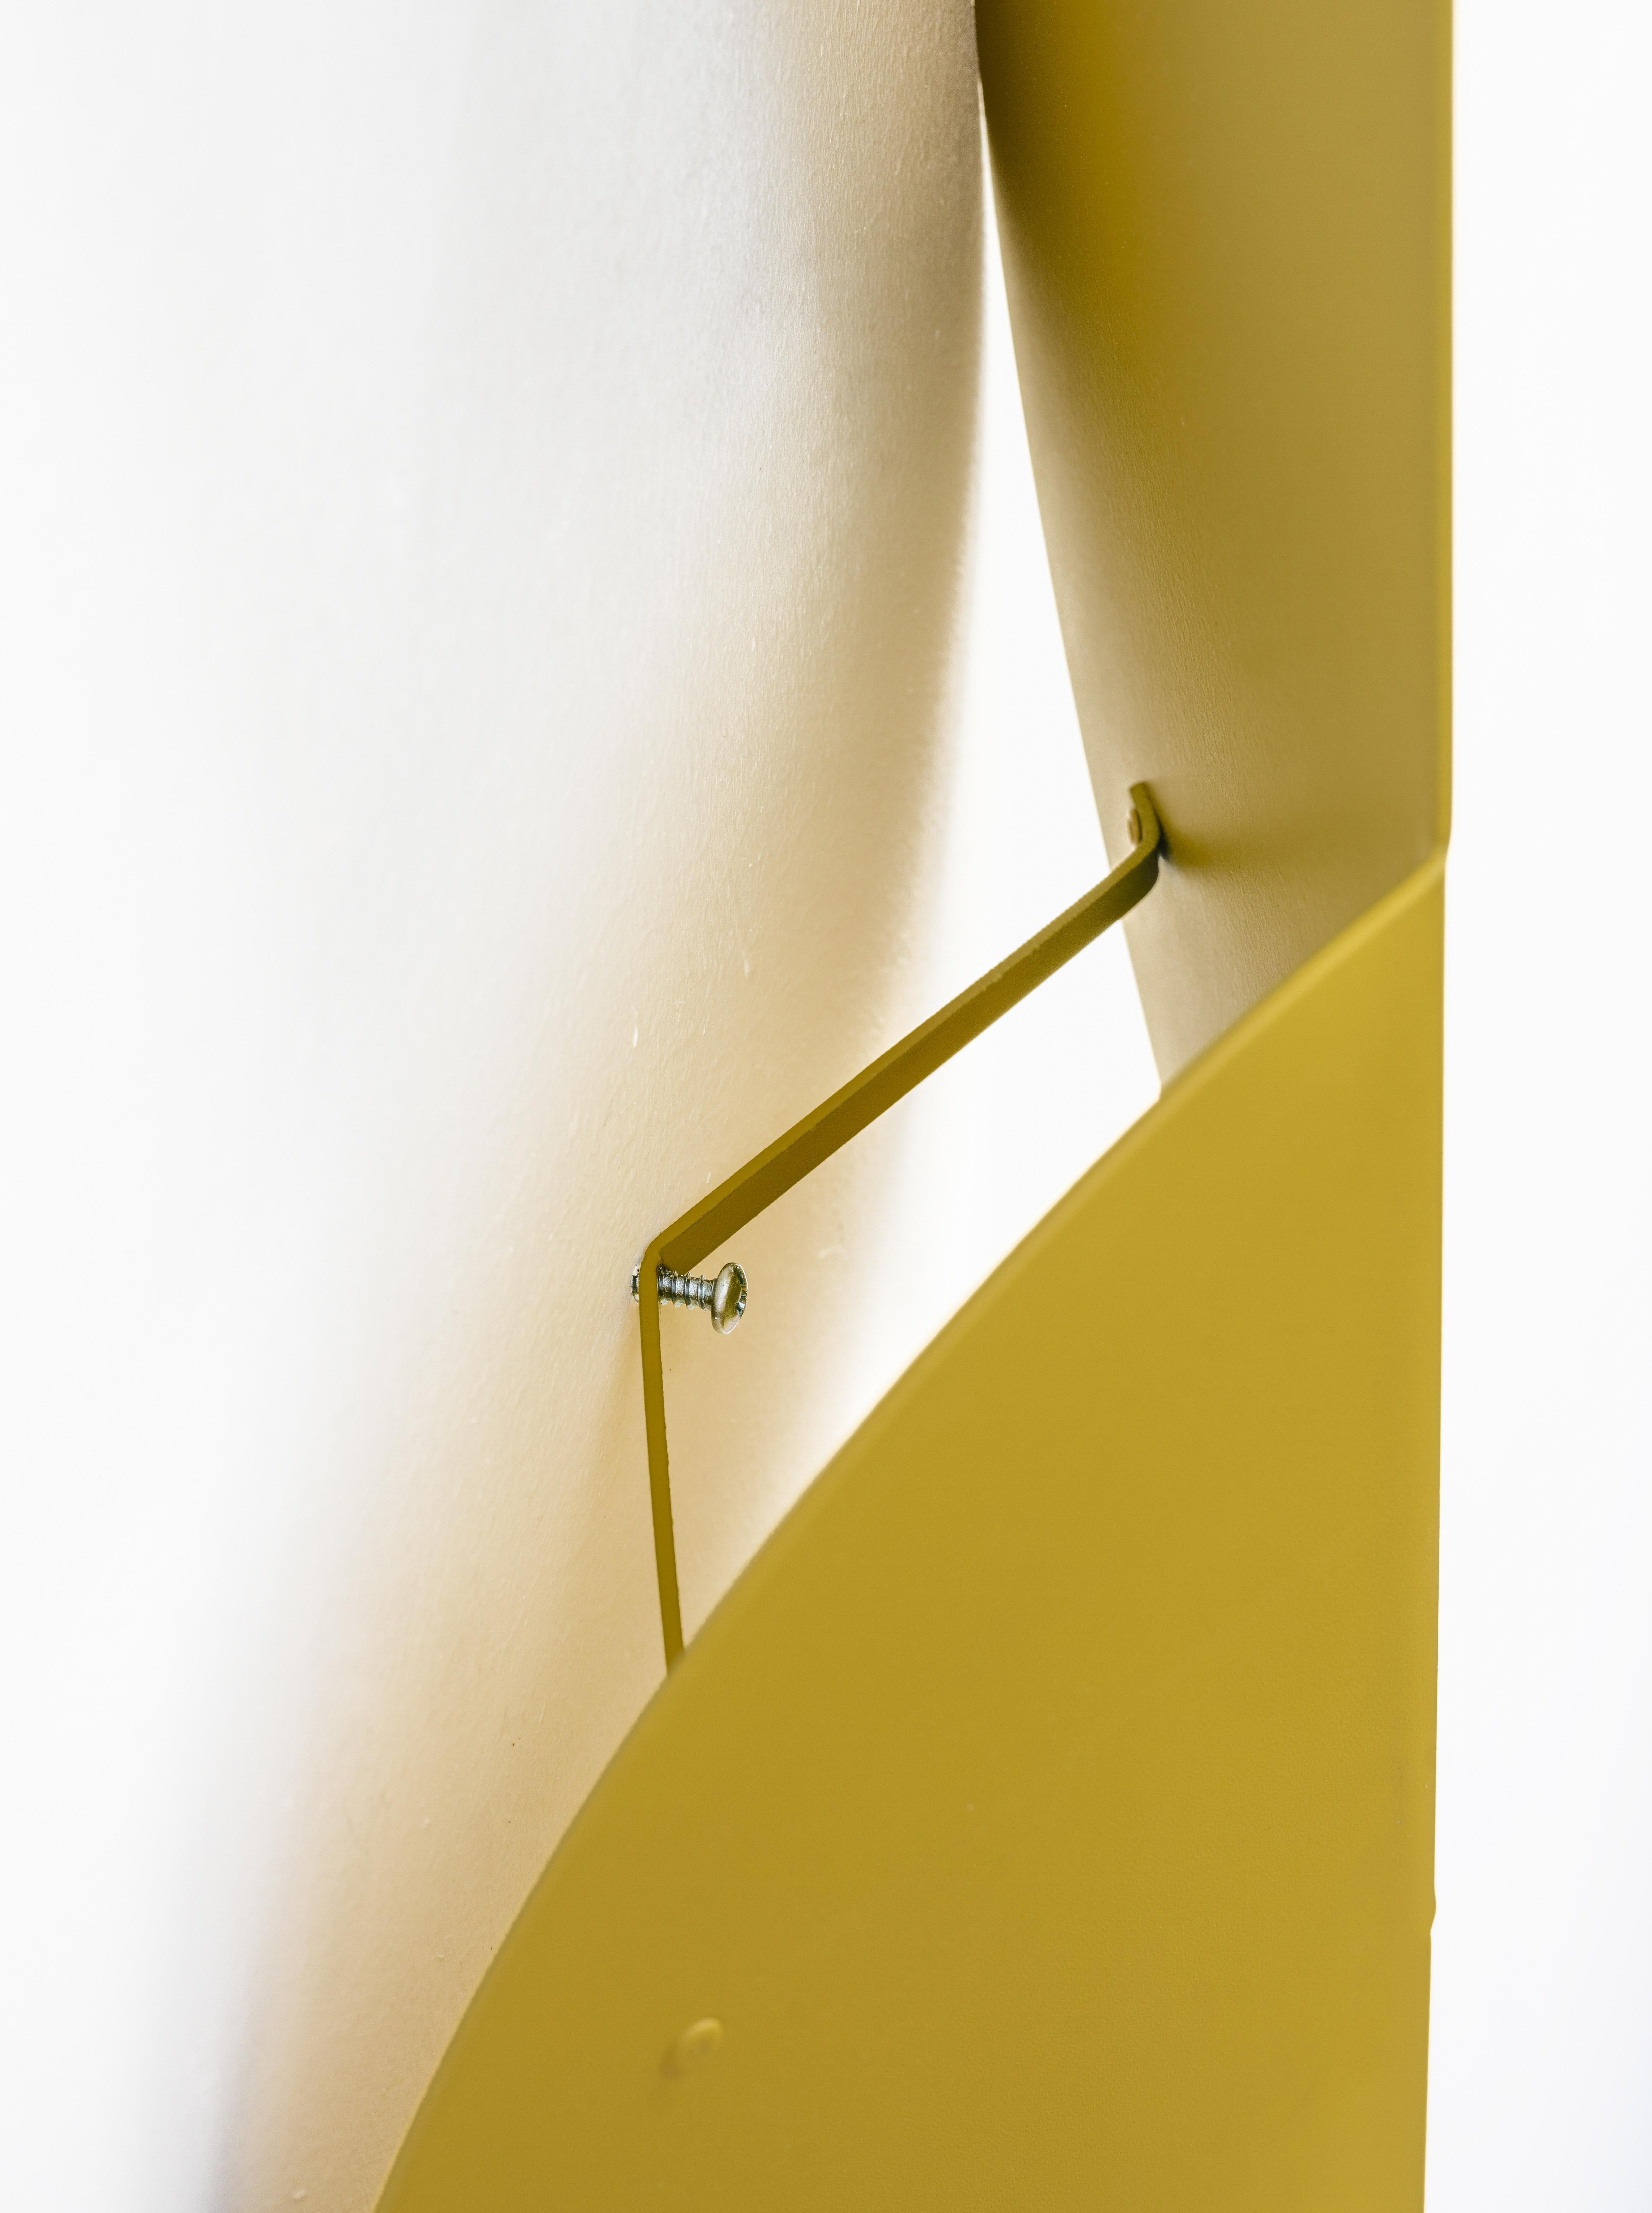 The tip-top wall hanging in mustard is a modern exploration of shape, fold, and color inspired by Bauhaus design principles of simplicity, geometrical form, and primary colors. It can be displayed solo or with other pieces in the Fold Collection.